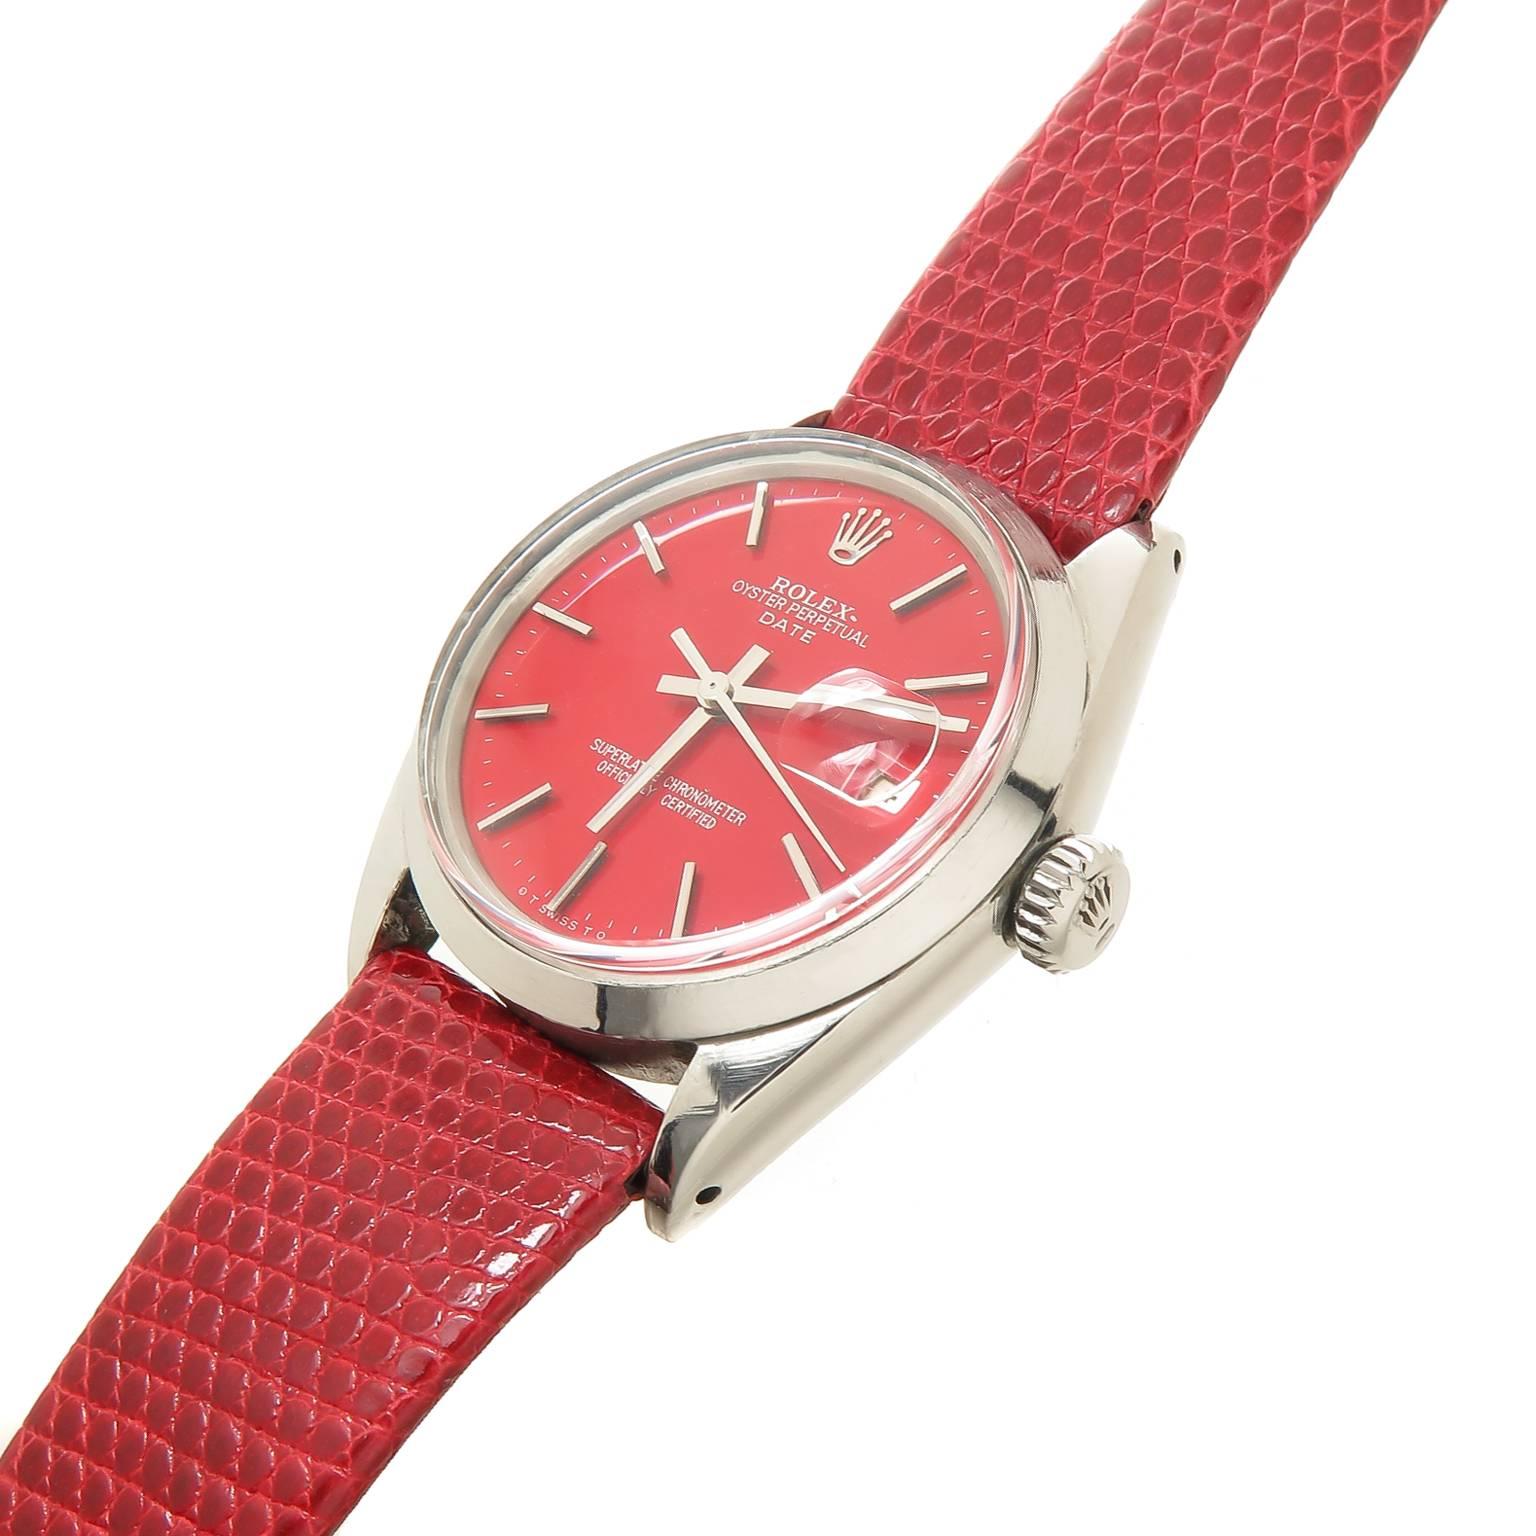 Circa 1950s Rolex Reference 1500, Date Model, 34 MM Stainless Steel Water resistant oyster Case. Caliber 1570 Automatic, self wining Movement. Custom Color Red Dial with raised Markers, sweep seconds hand and a calendar window at the 3. New Red